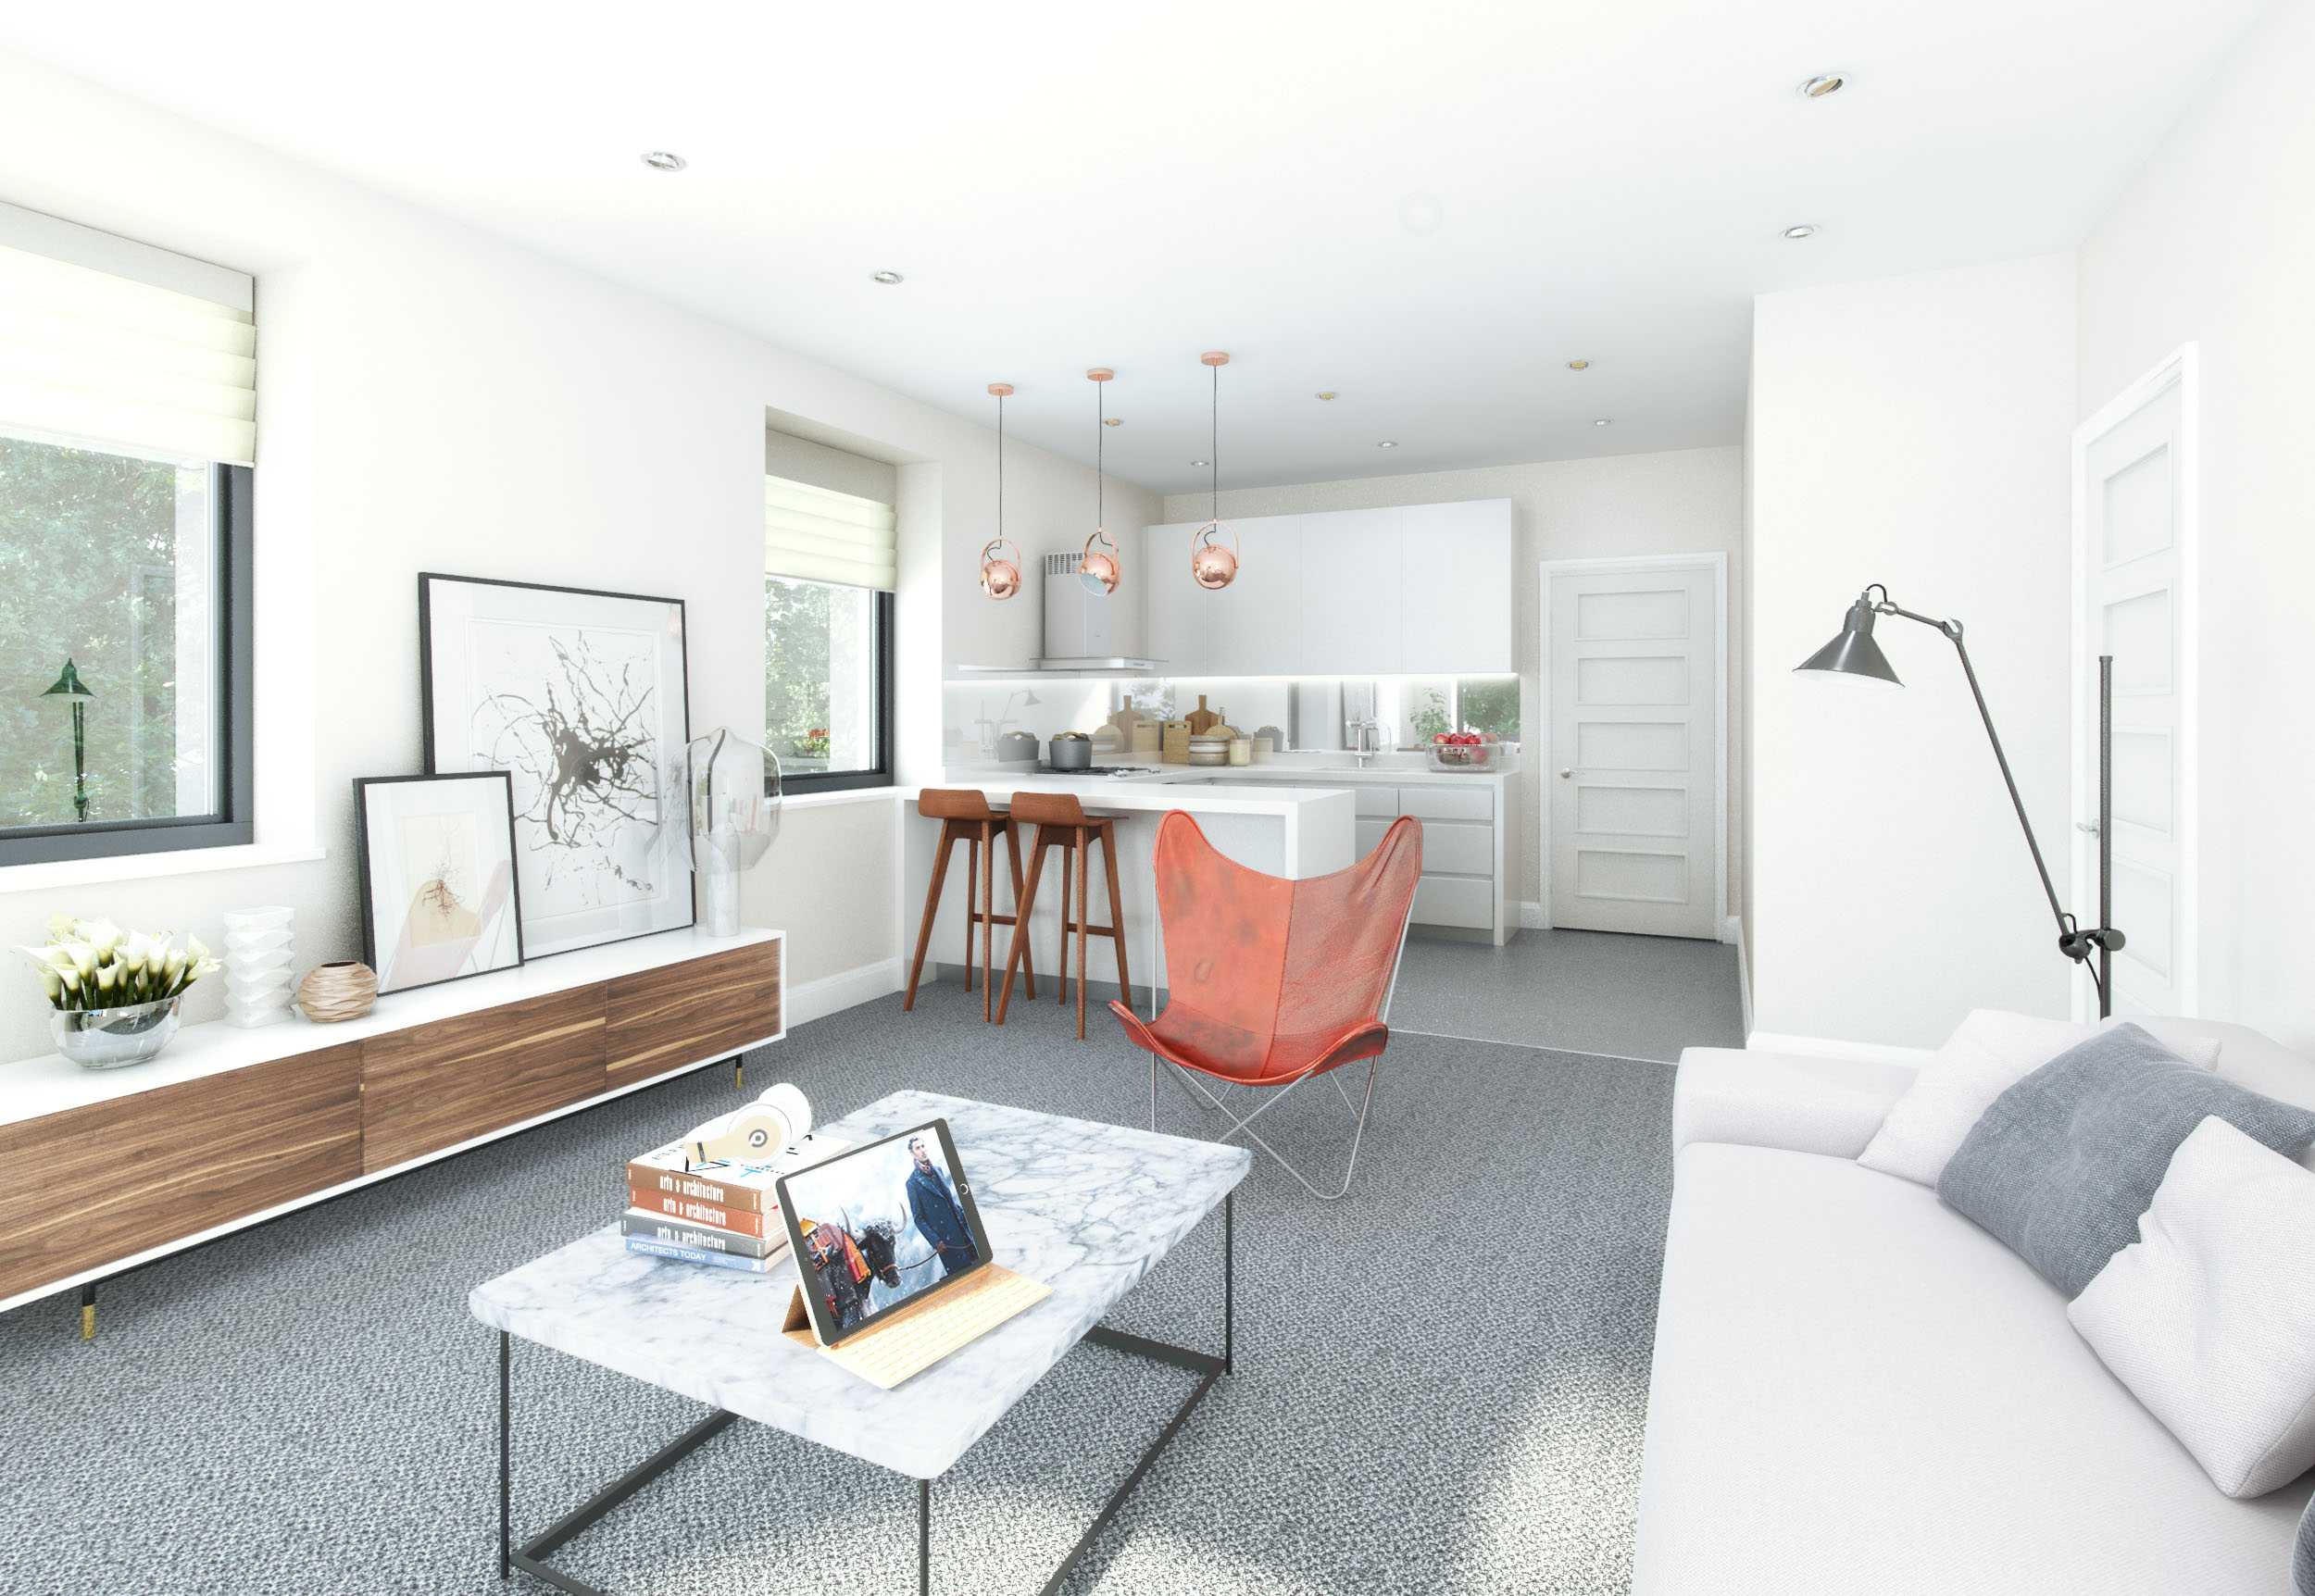 Office to Residential Conversion scheme